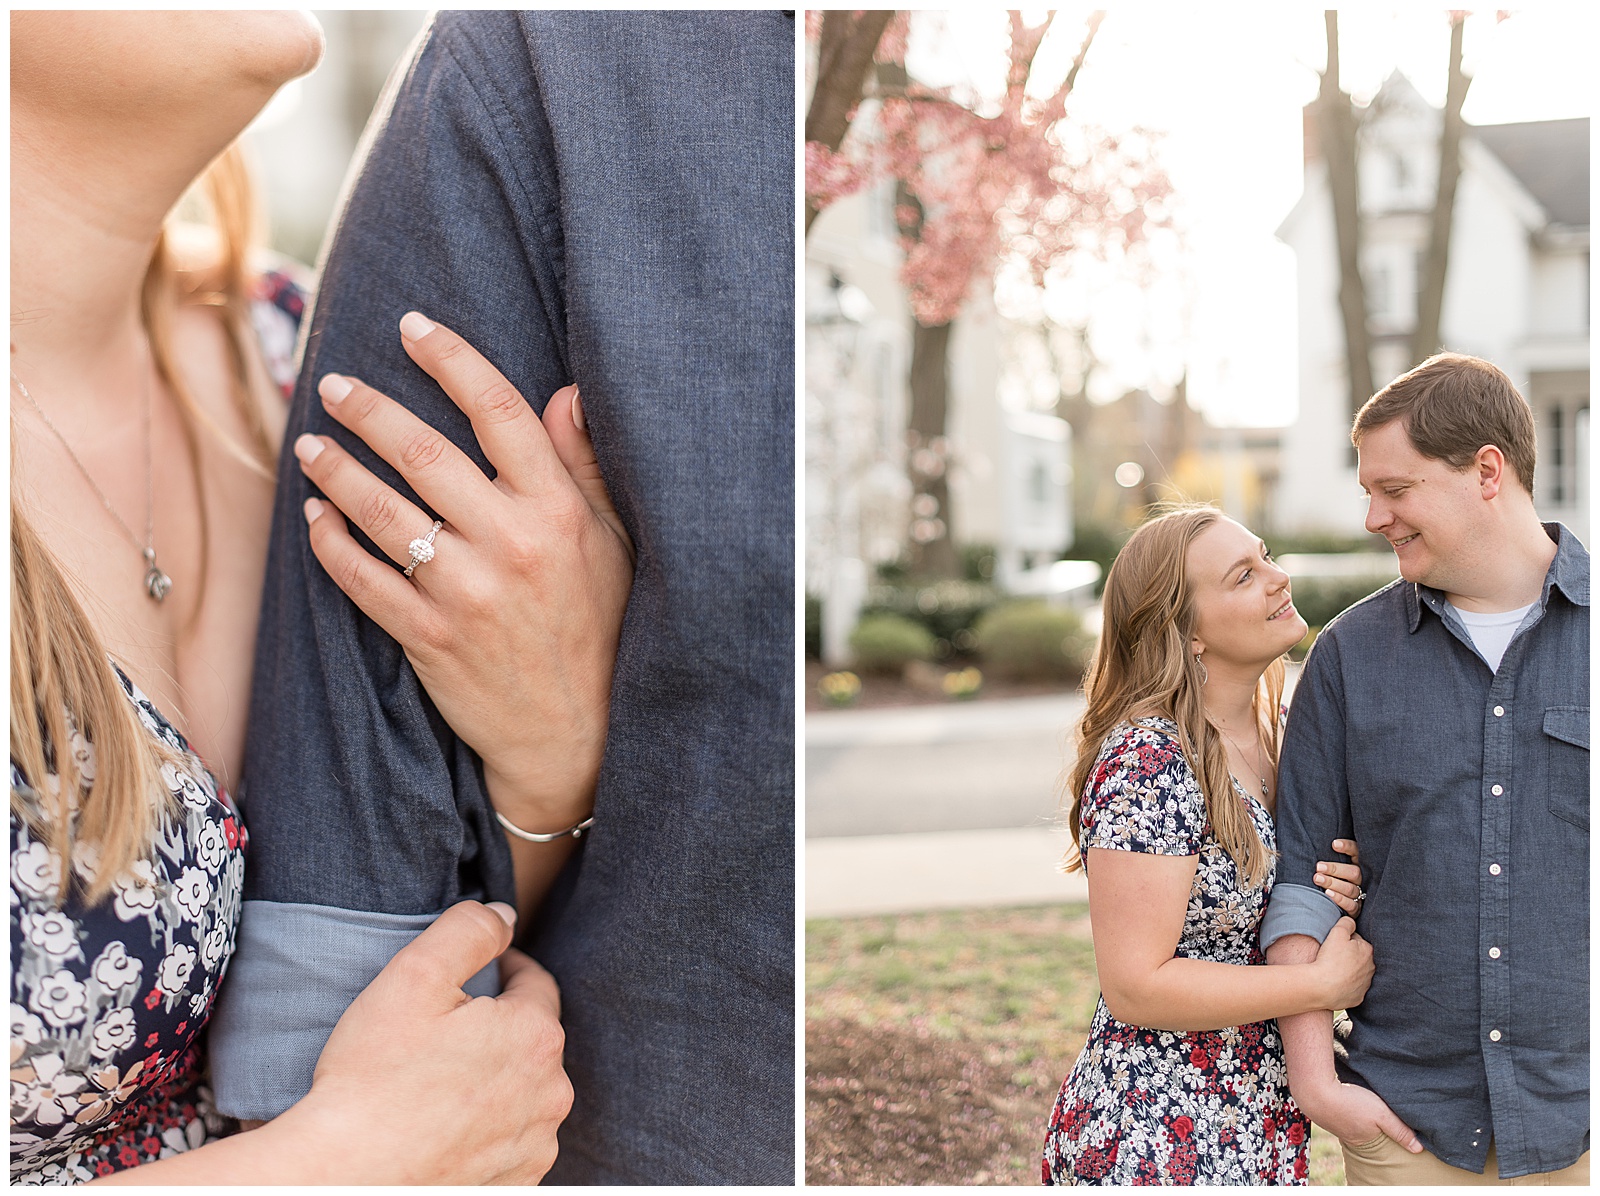 bride-to-be displays diamond engagement ring as she wraps her arms around her man